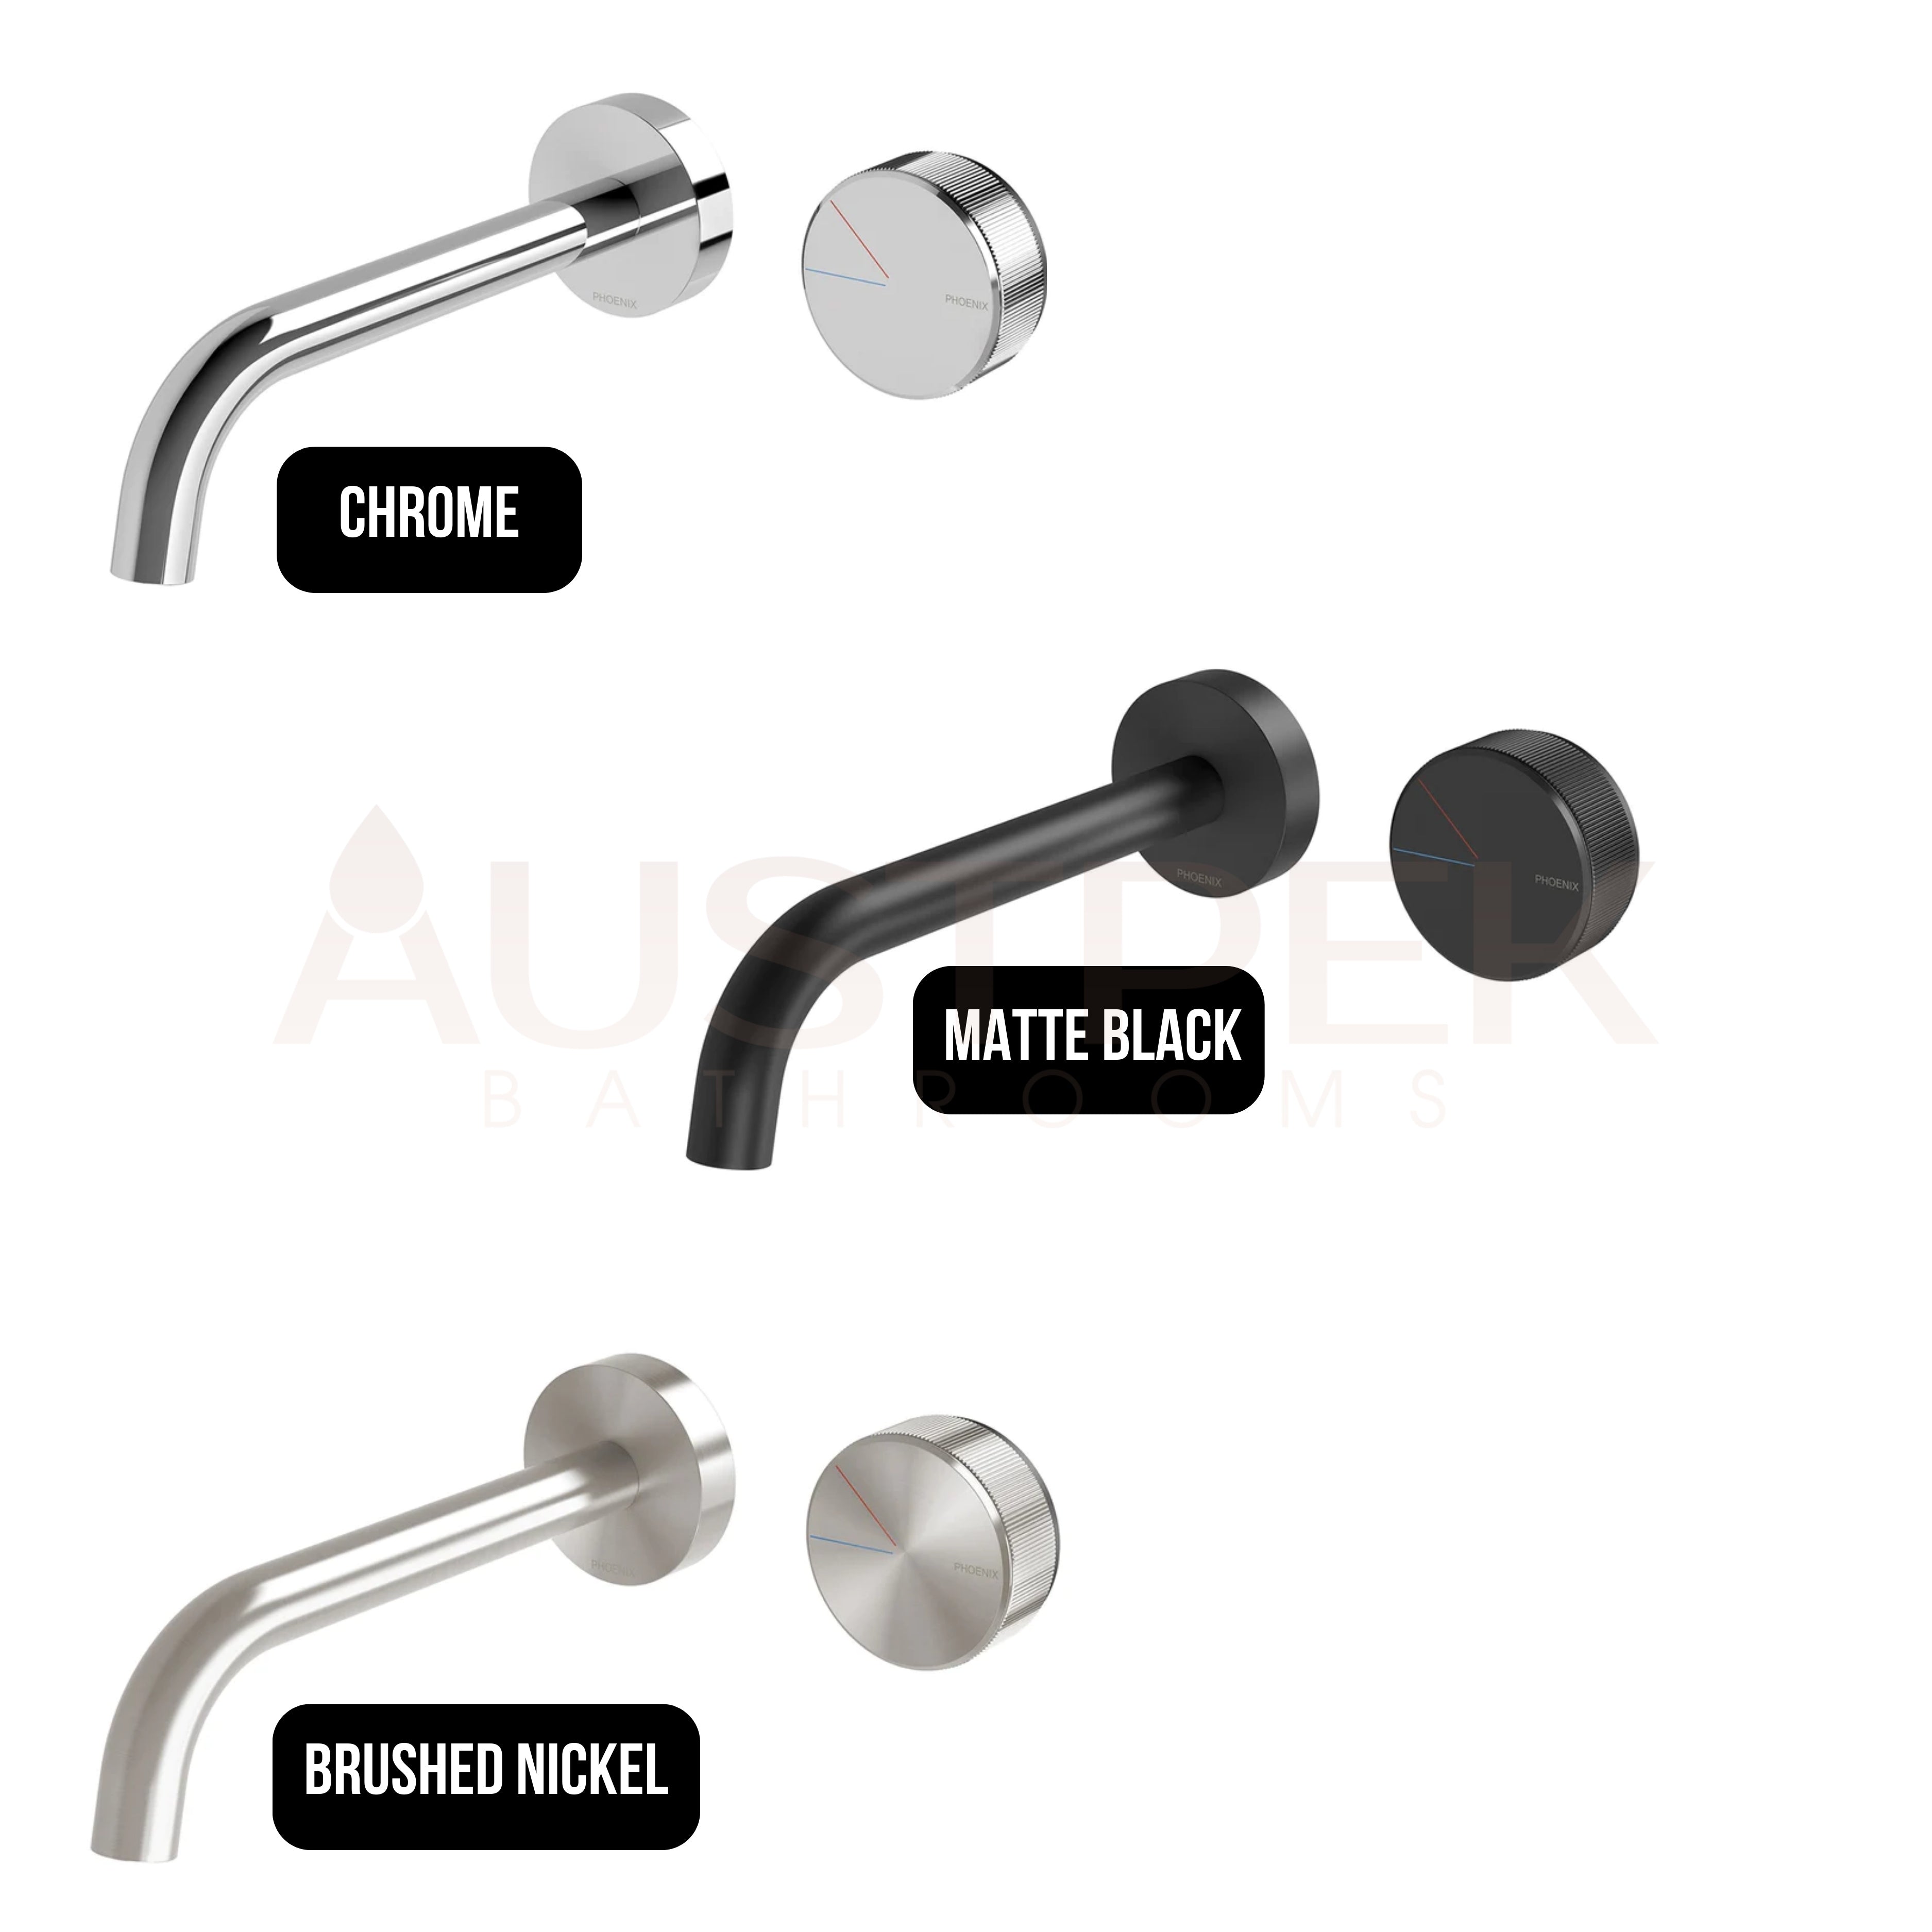 PHOENIX AXIA WALL BASIN BATH CURVED OUTLET MIXER SET 180MM BRUSHED NICKEL